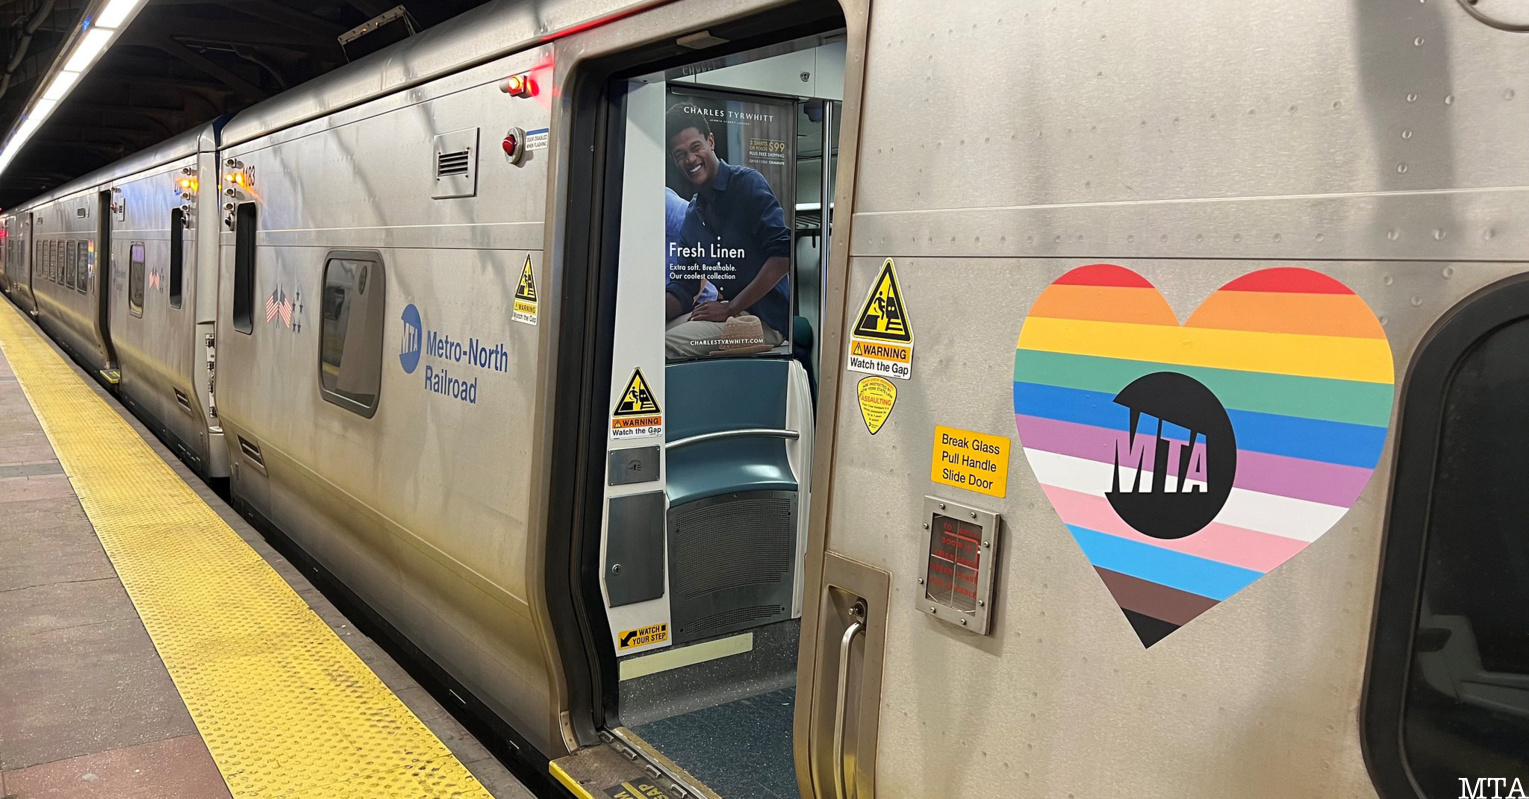 Pride Decal on the Subway